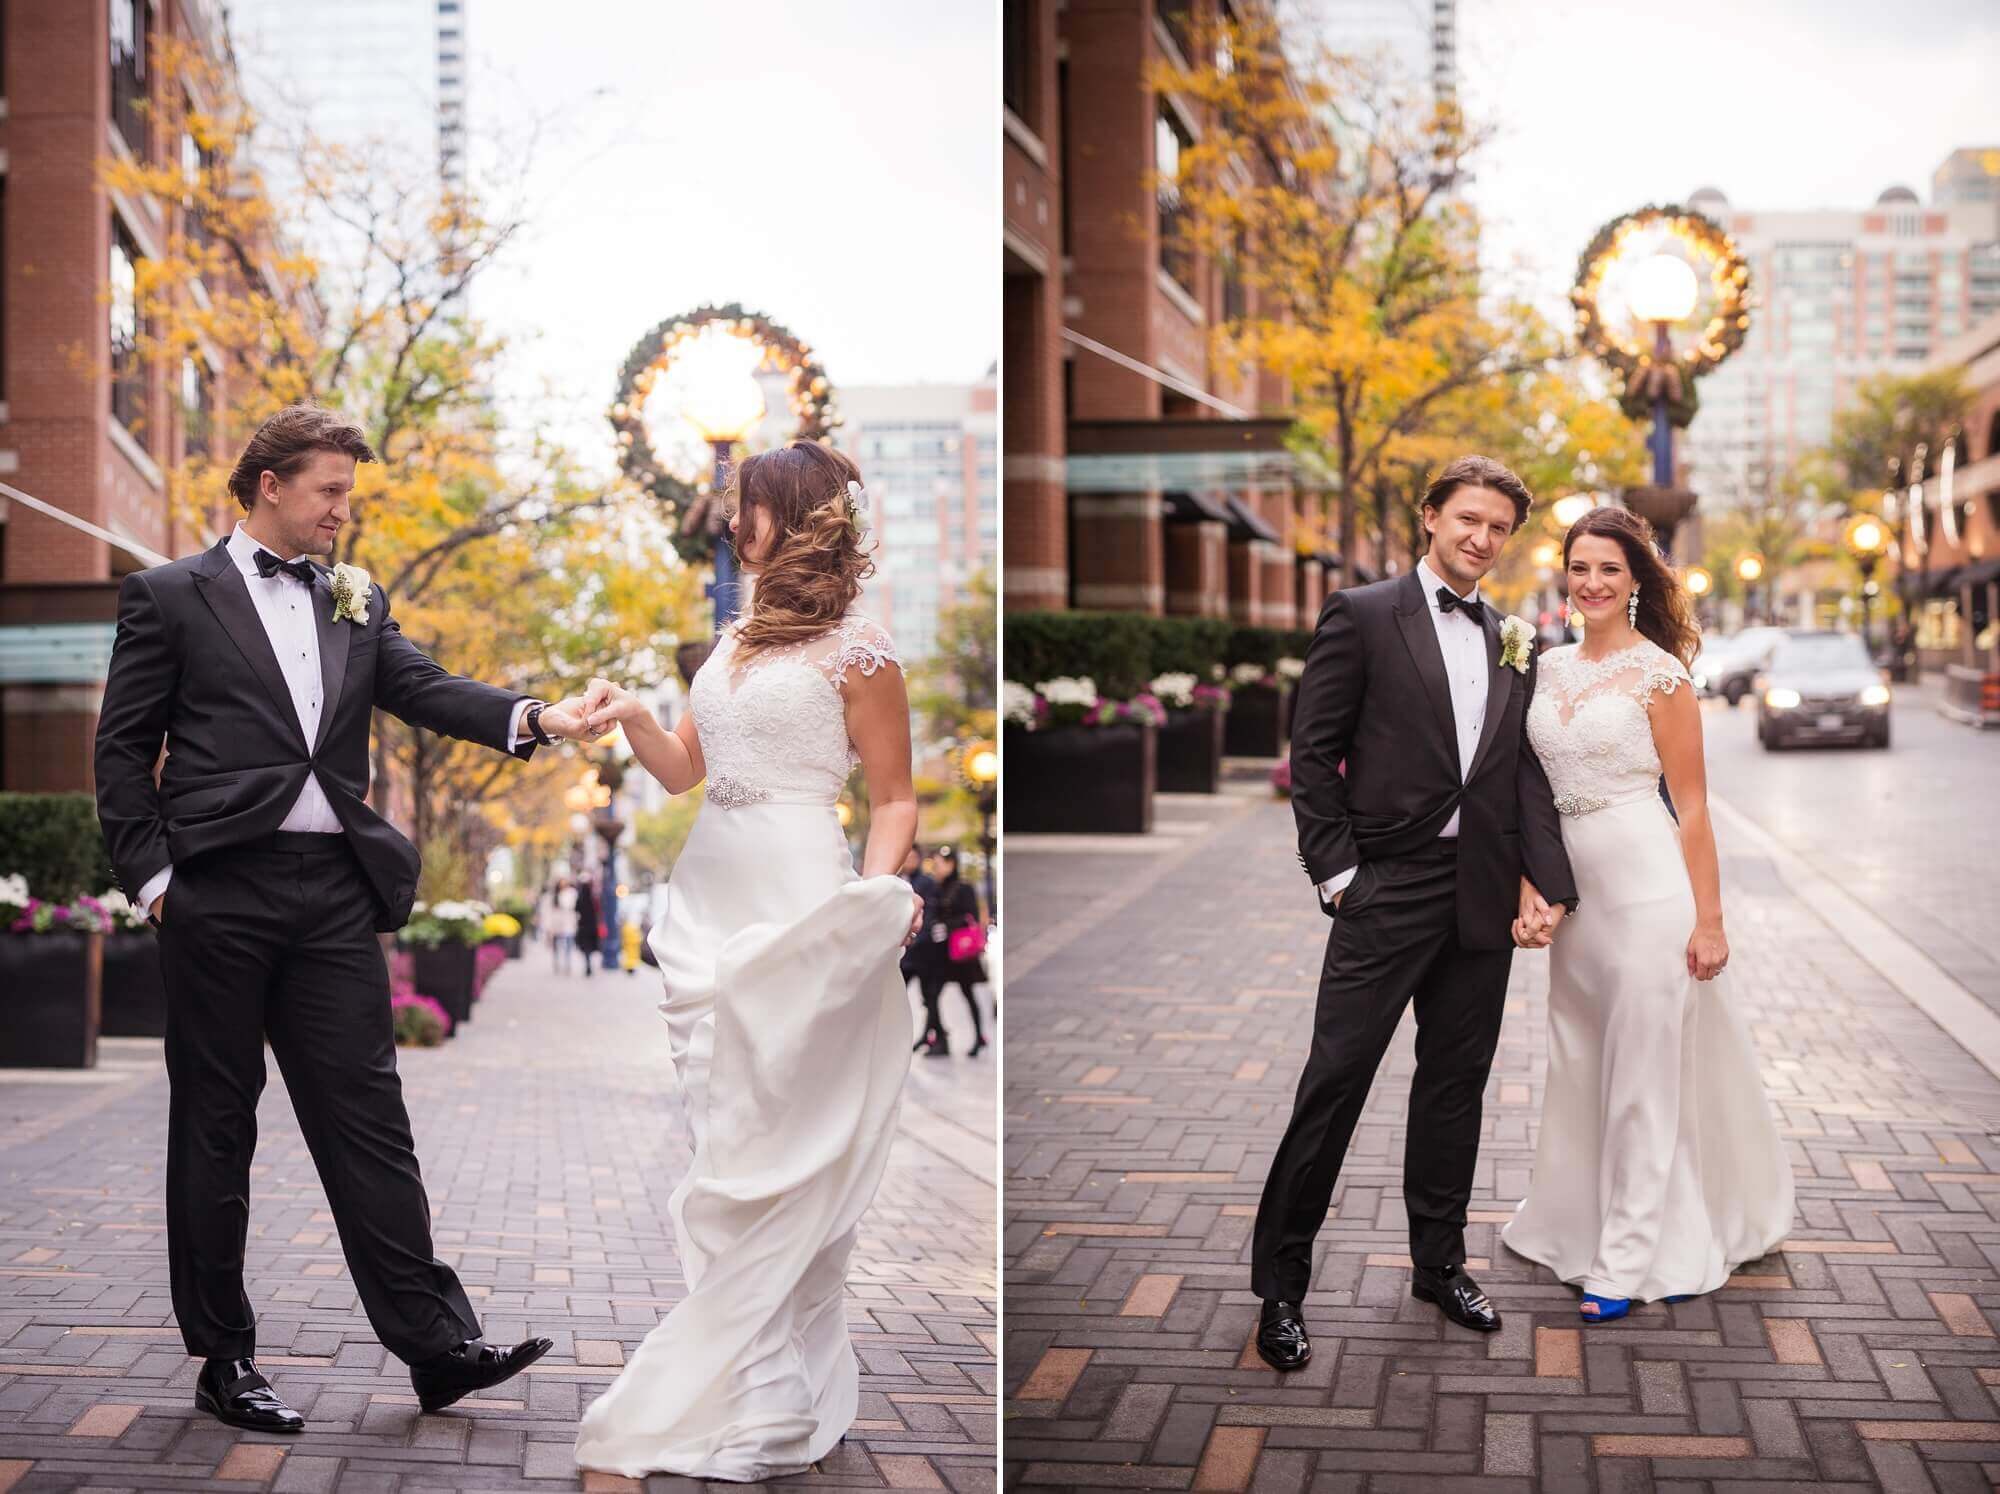 City portraits of the bride and groom at Yorkville, Toronto